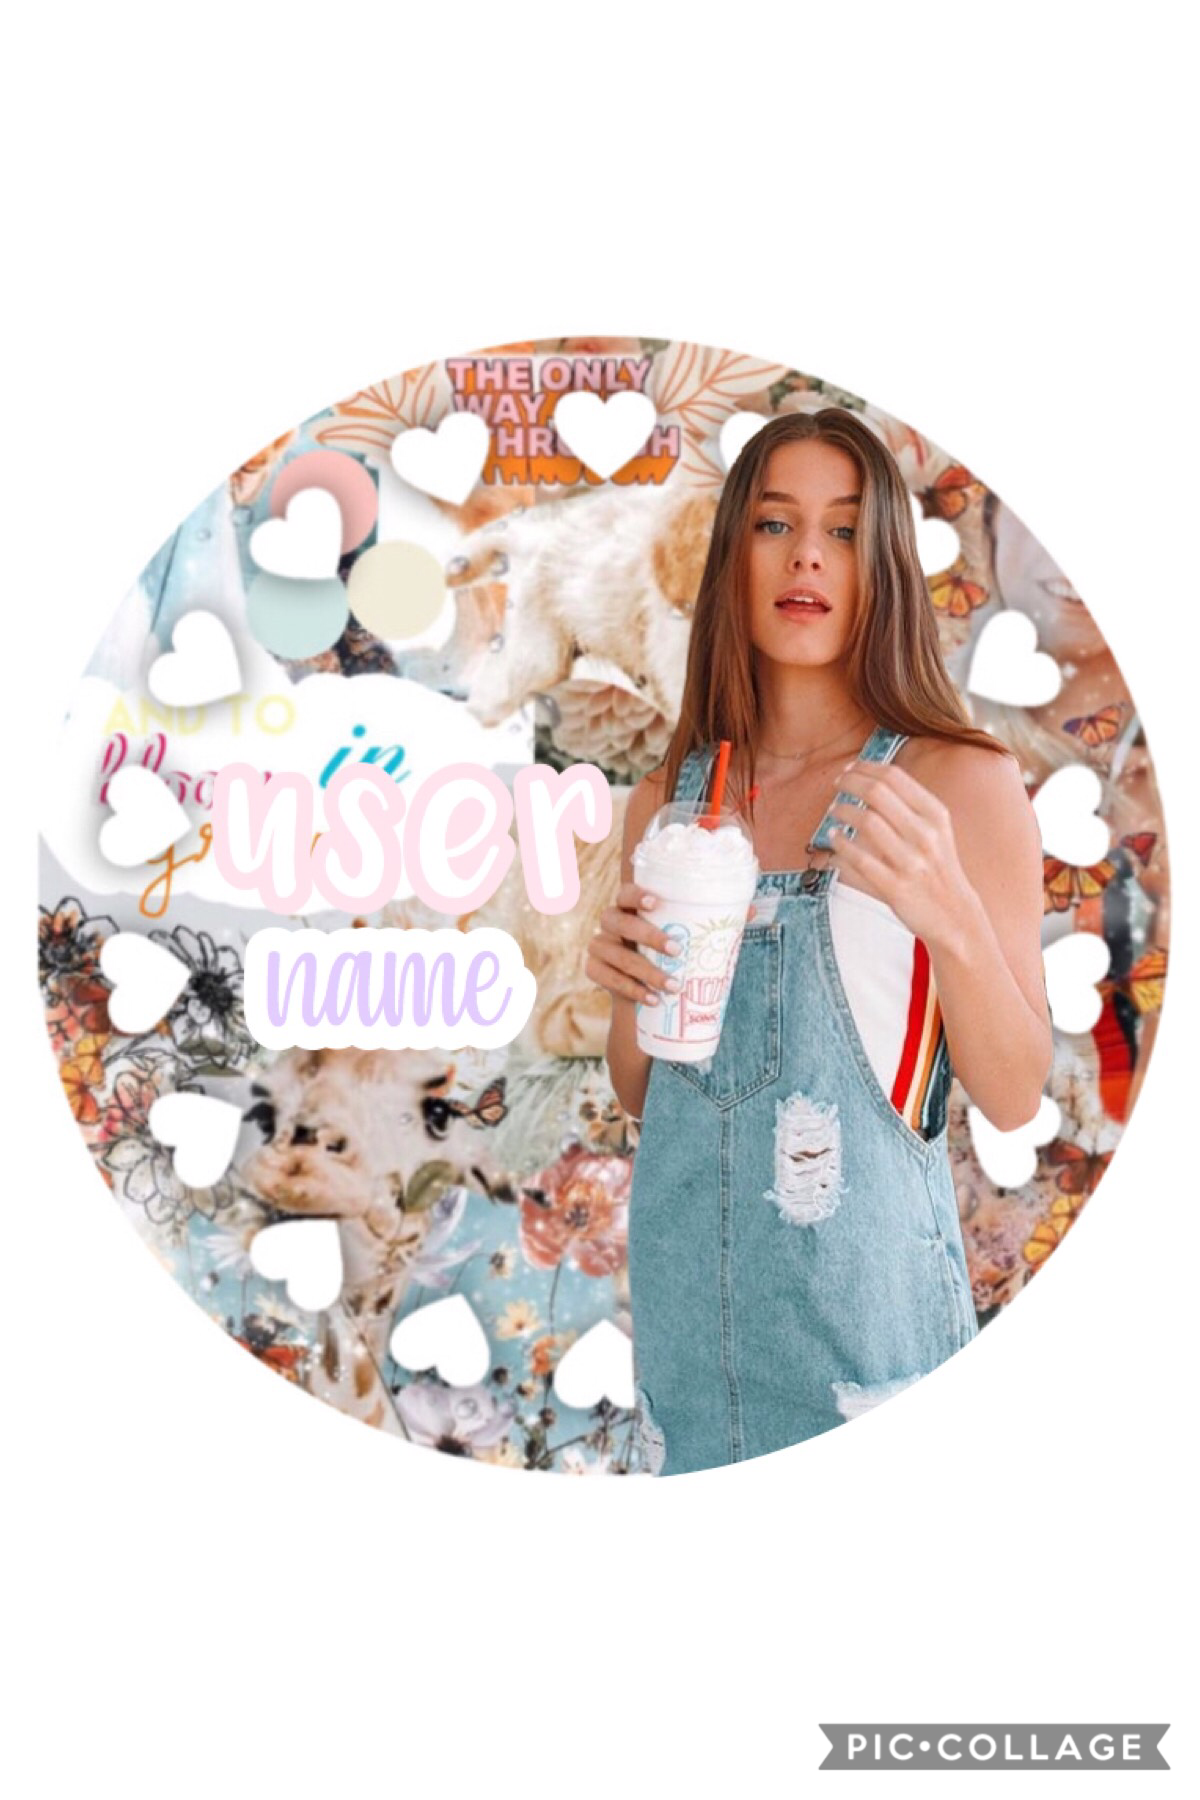 tap

🦋 hello gorgeous creations of god! if you like this icon feel free to tell me to put you username on it 🦋